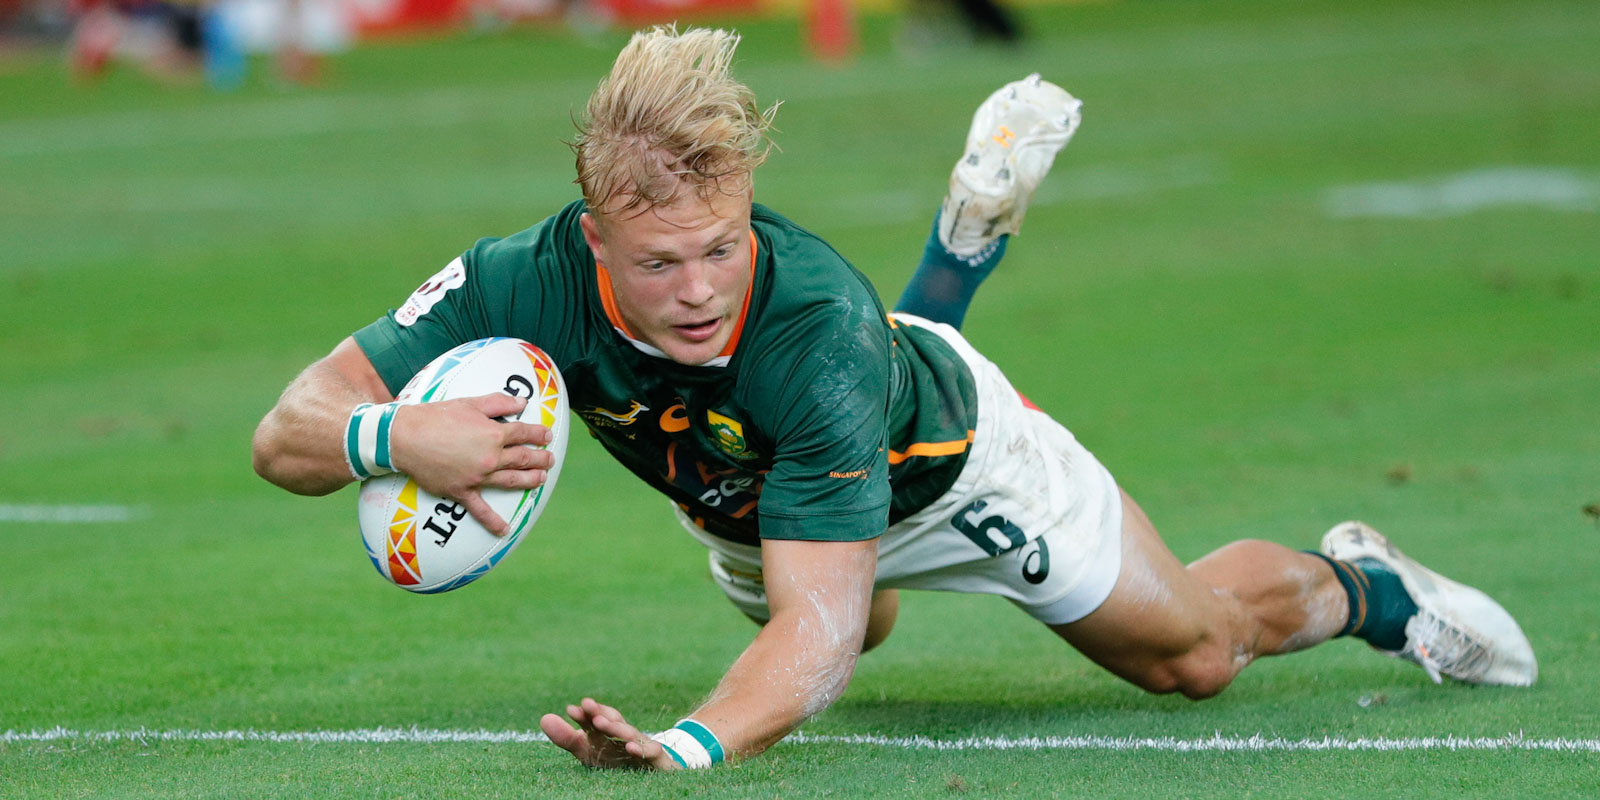 JC Pretorius scored two tries in the opening game against Canada.